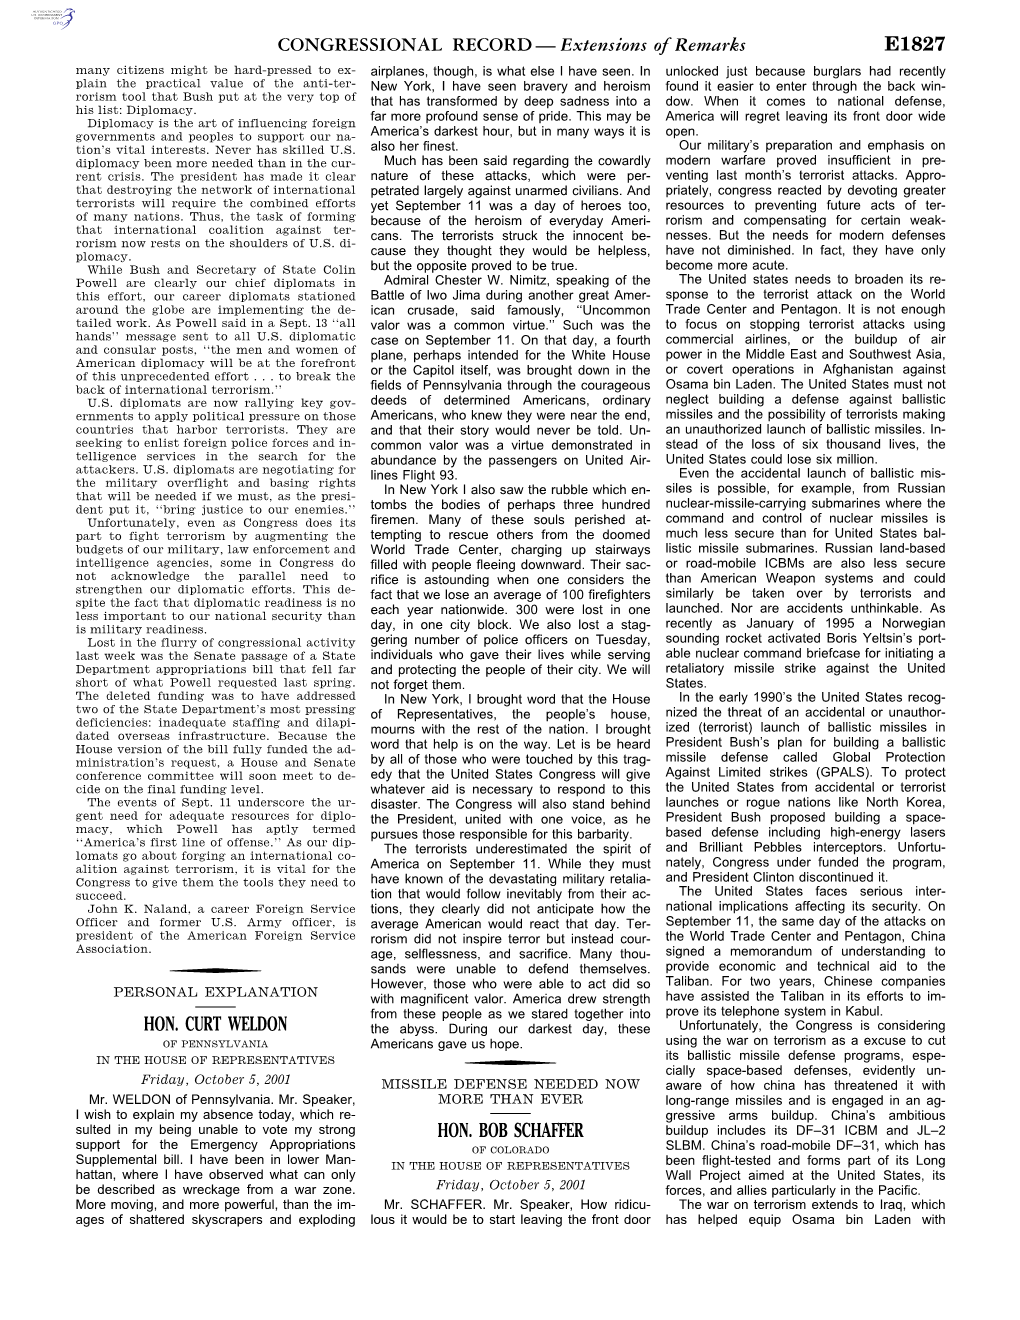 CONGRESSIONAL RECORD— Extensions of Remarks E1827 HON